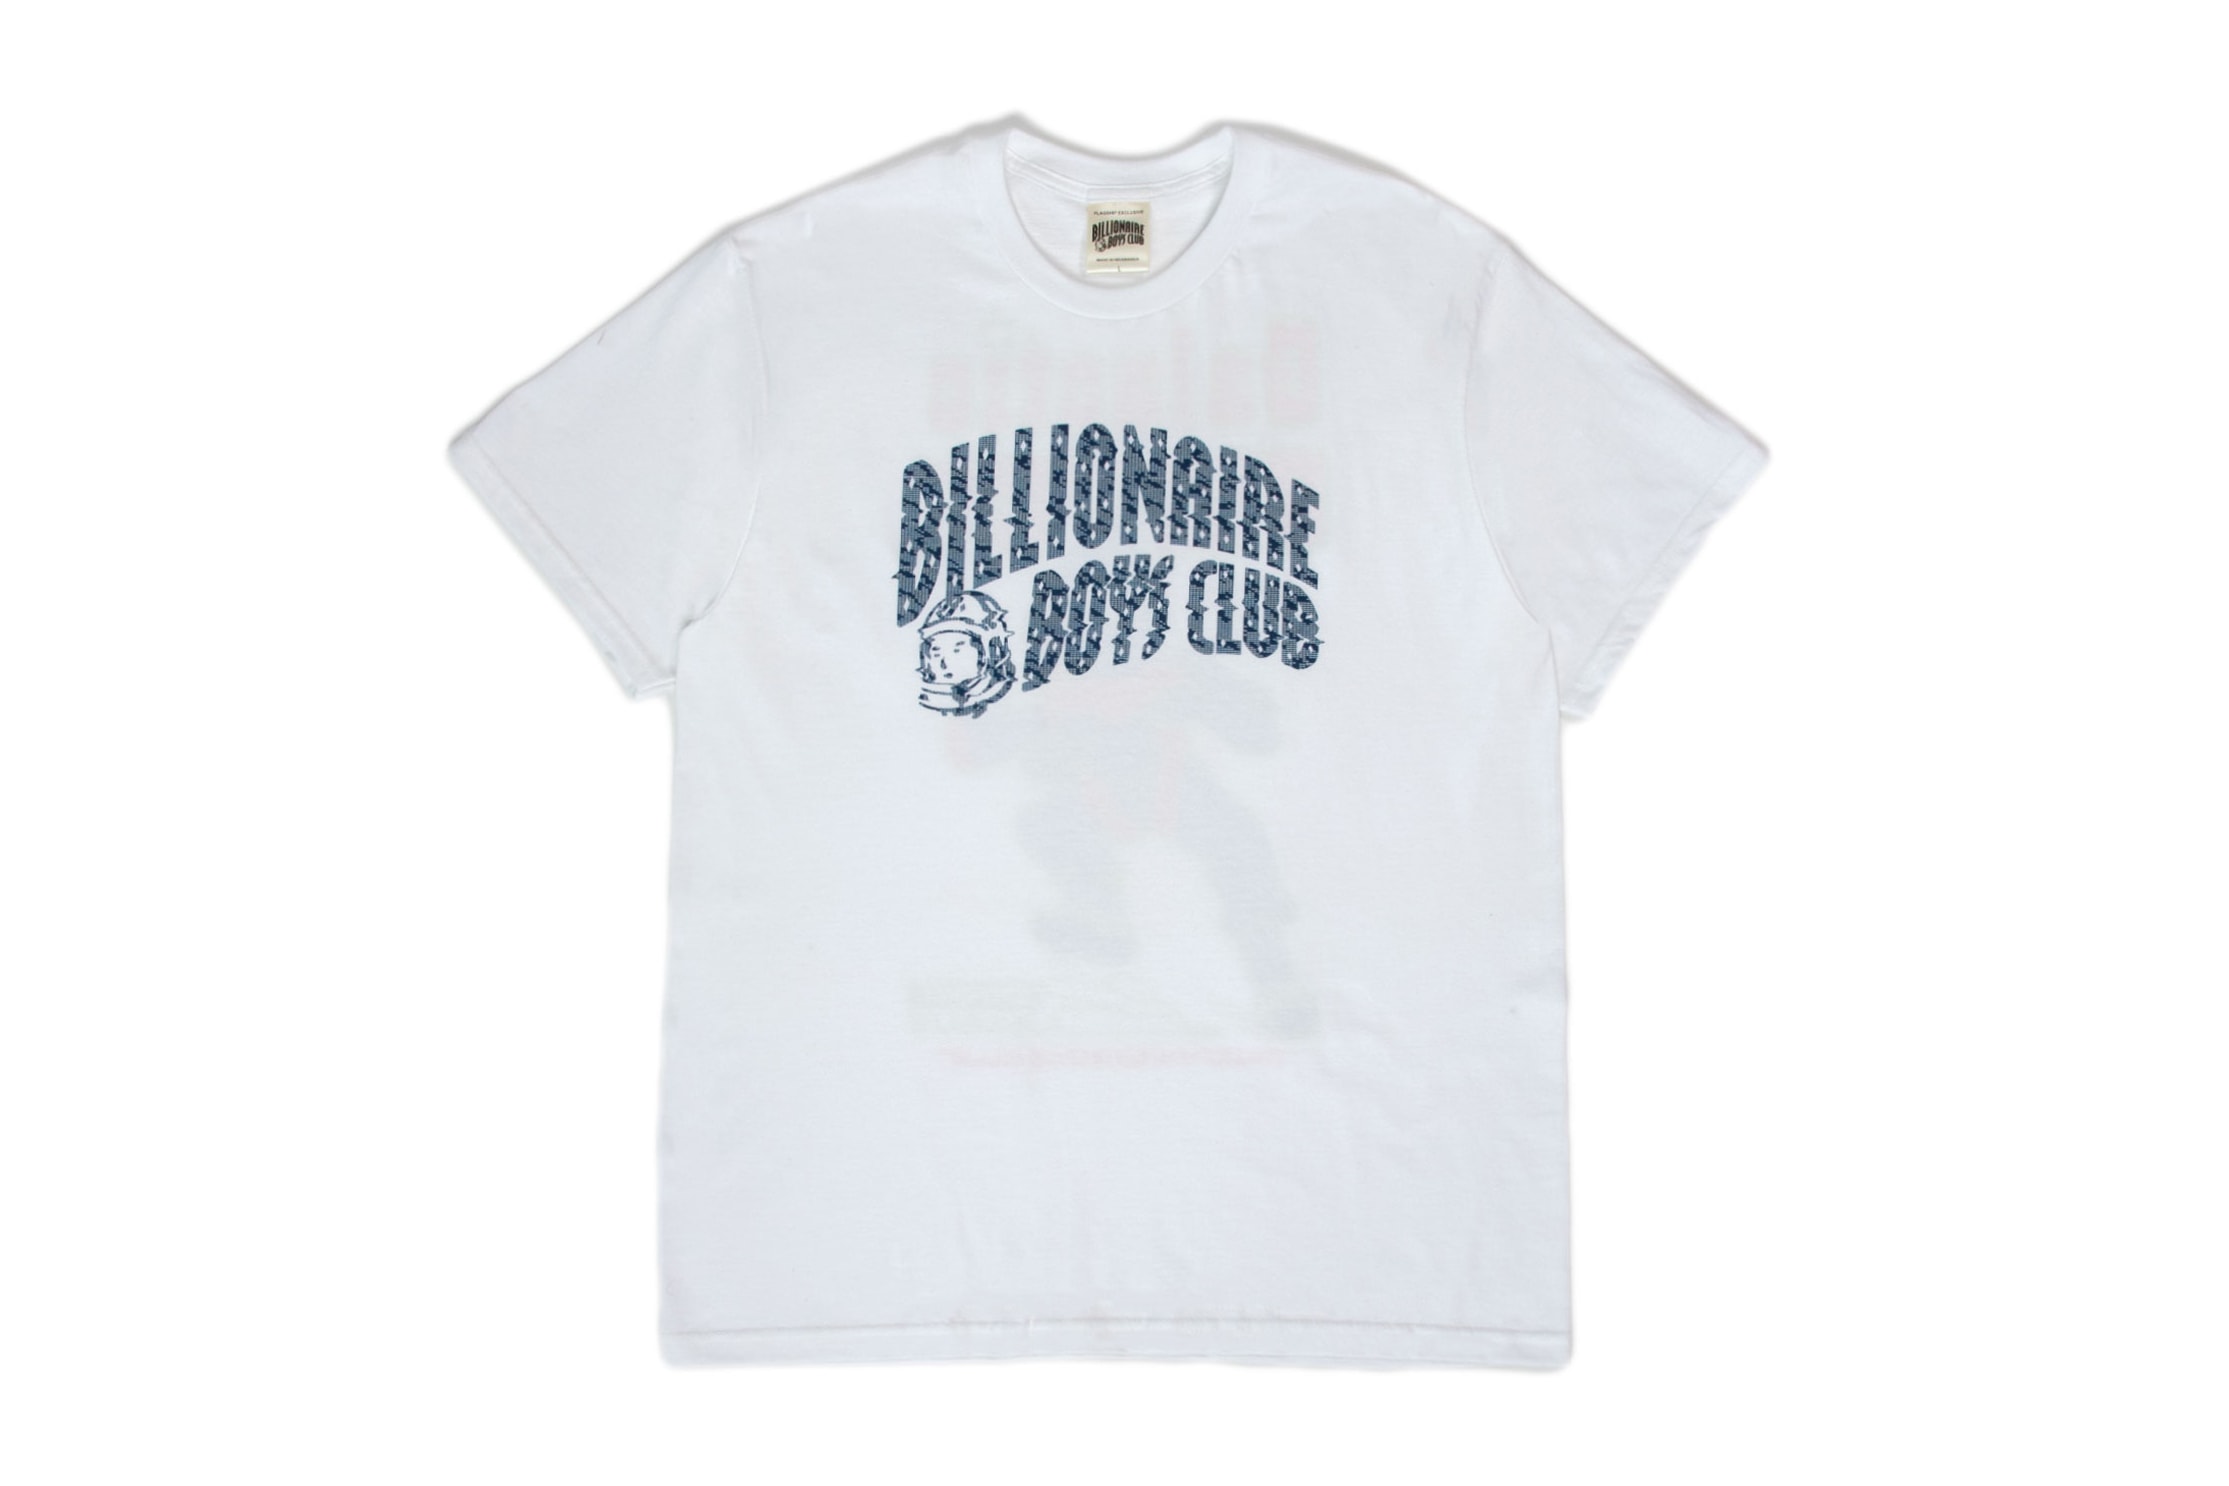 Billionaire Boys Club Call of Duty League Collab Capsule Collection Apparel Limited Edition Modern Warfare Black Ops WWII